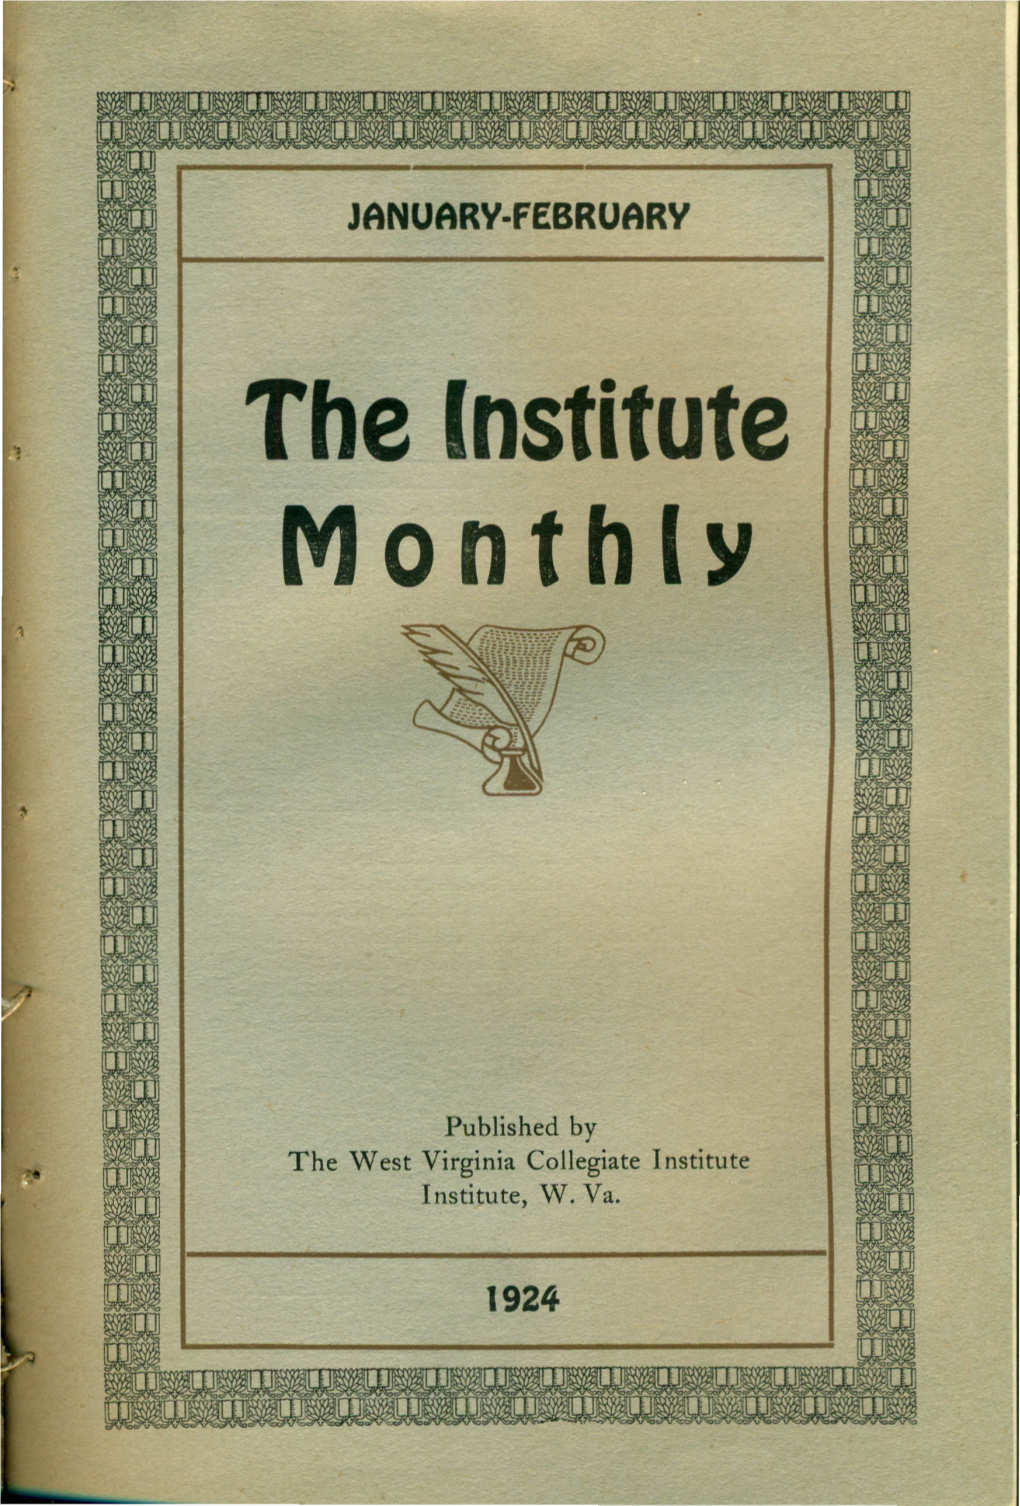 The Institute Monthly